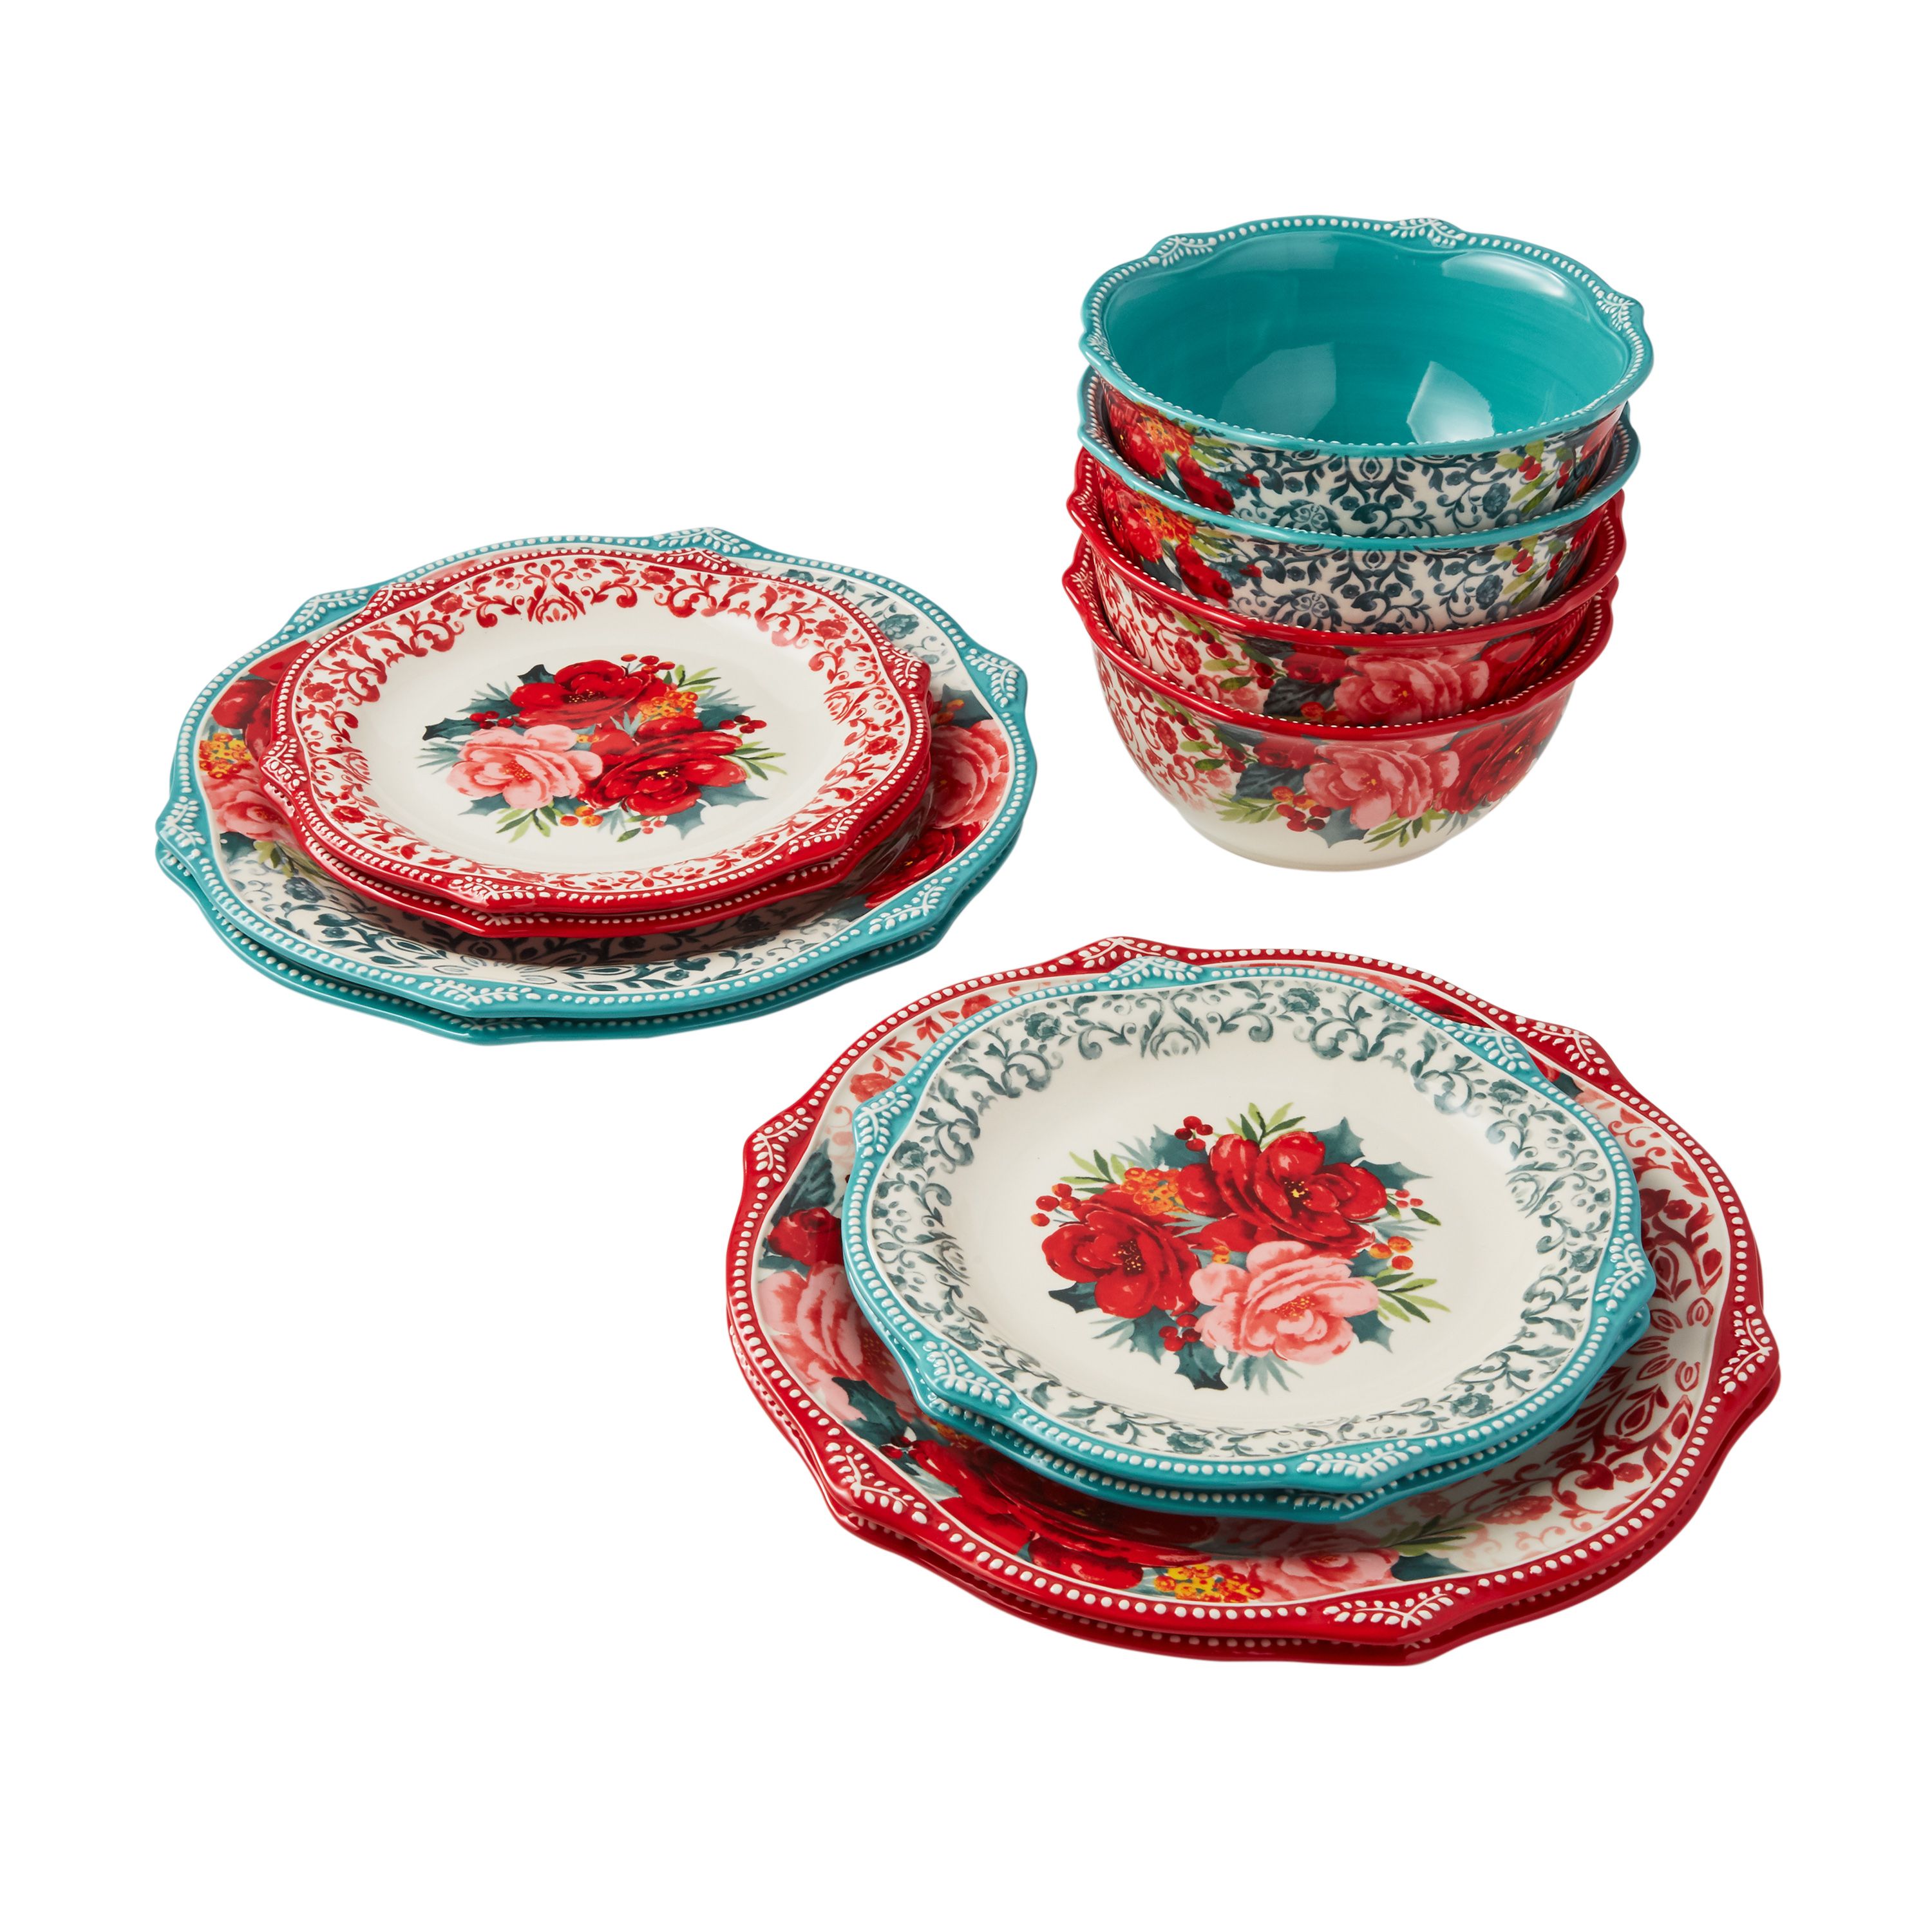 New Pioneer Woman Holiday 12 Pc Dinnerware Set **4 ASSORTED DESIGNS 